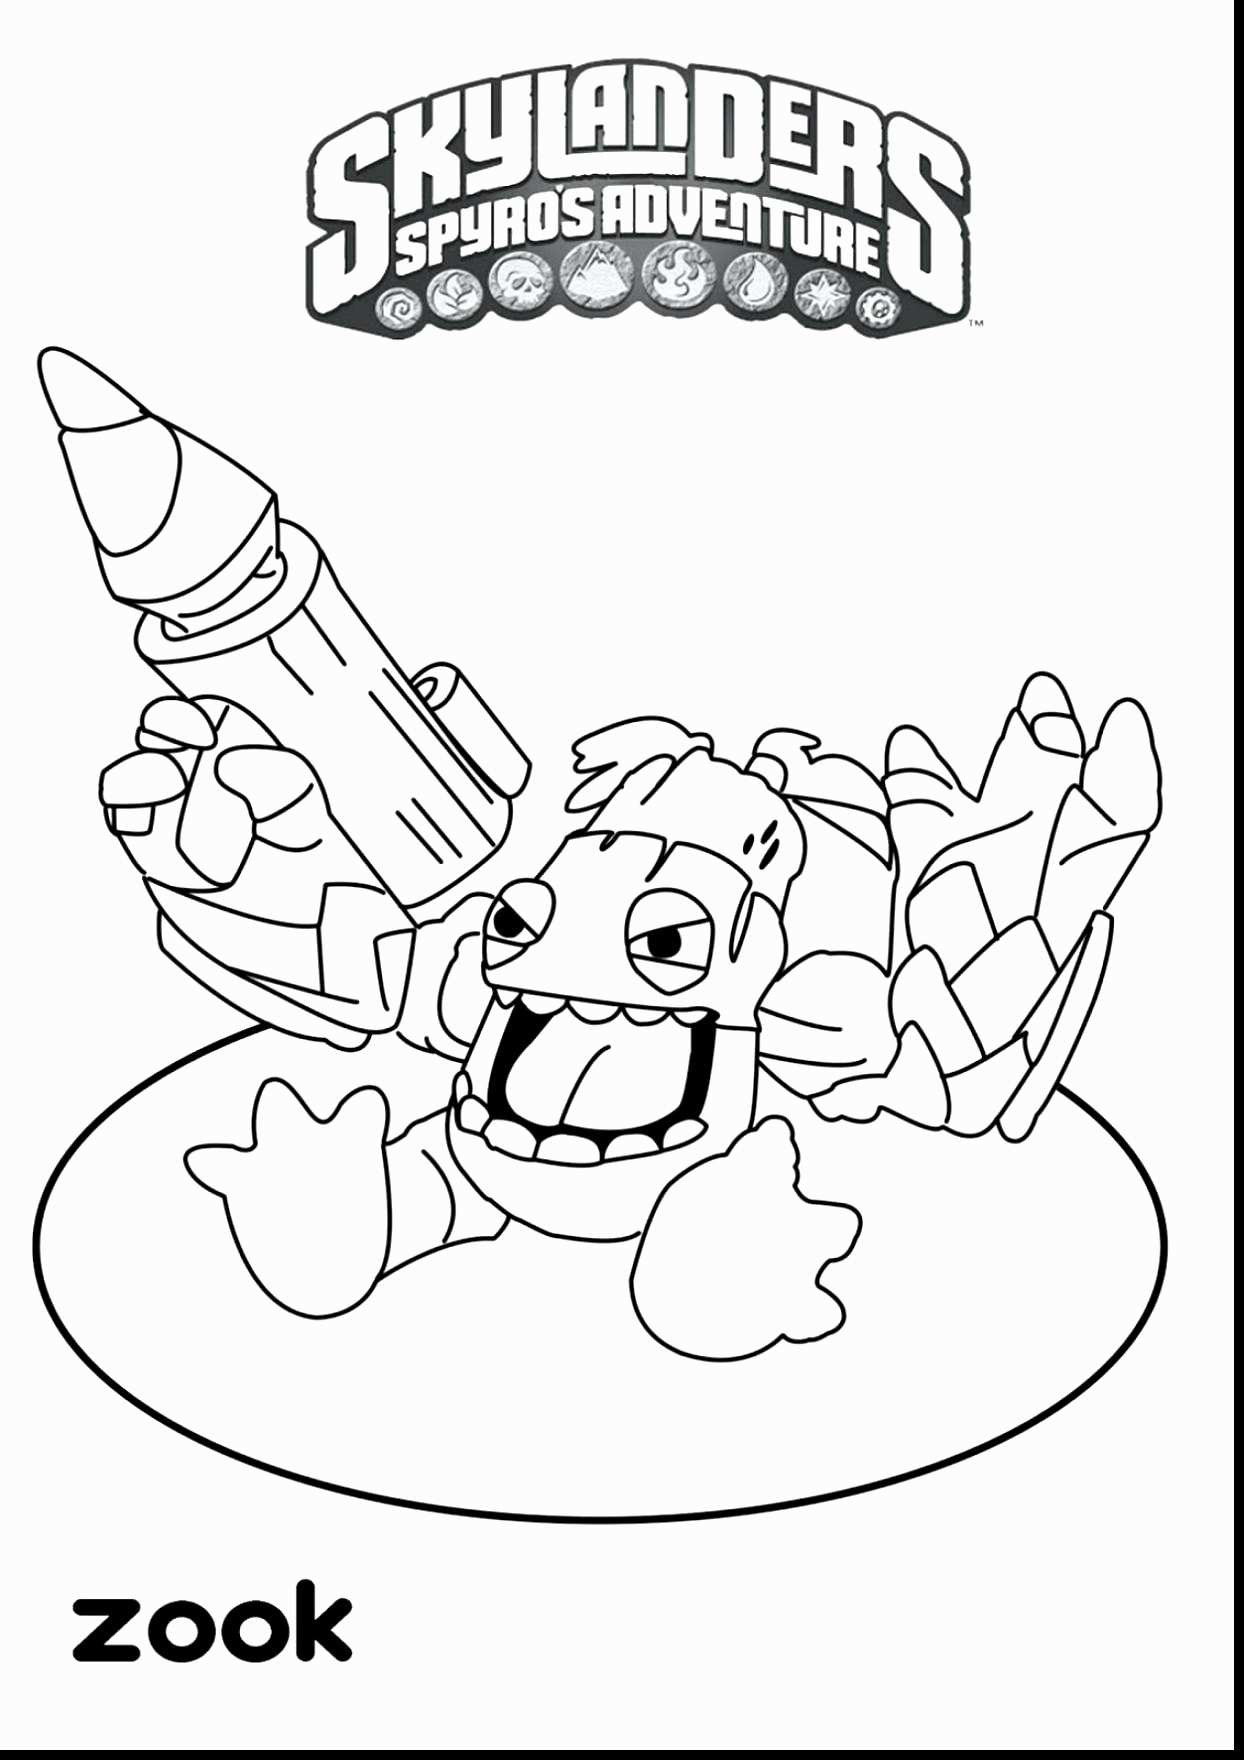 Princess Coloring Sheets Elegant Cool Coloring Page Unique Witch Coloring Pages New Crayola Pages 0d